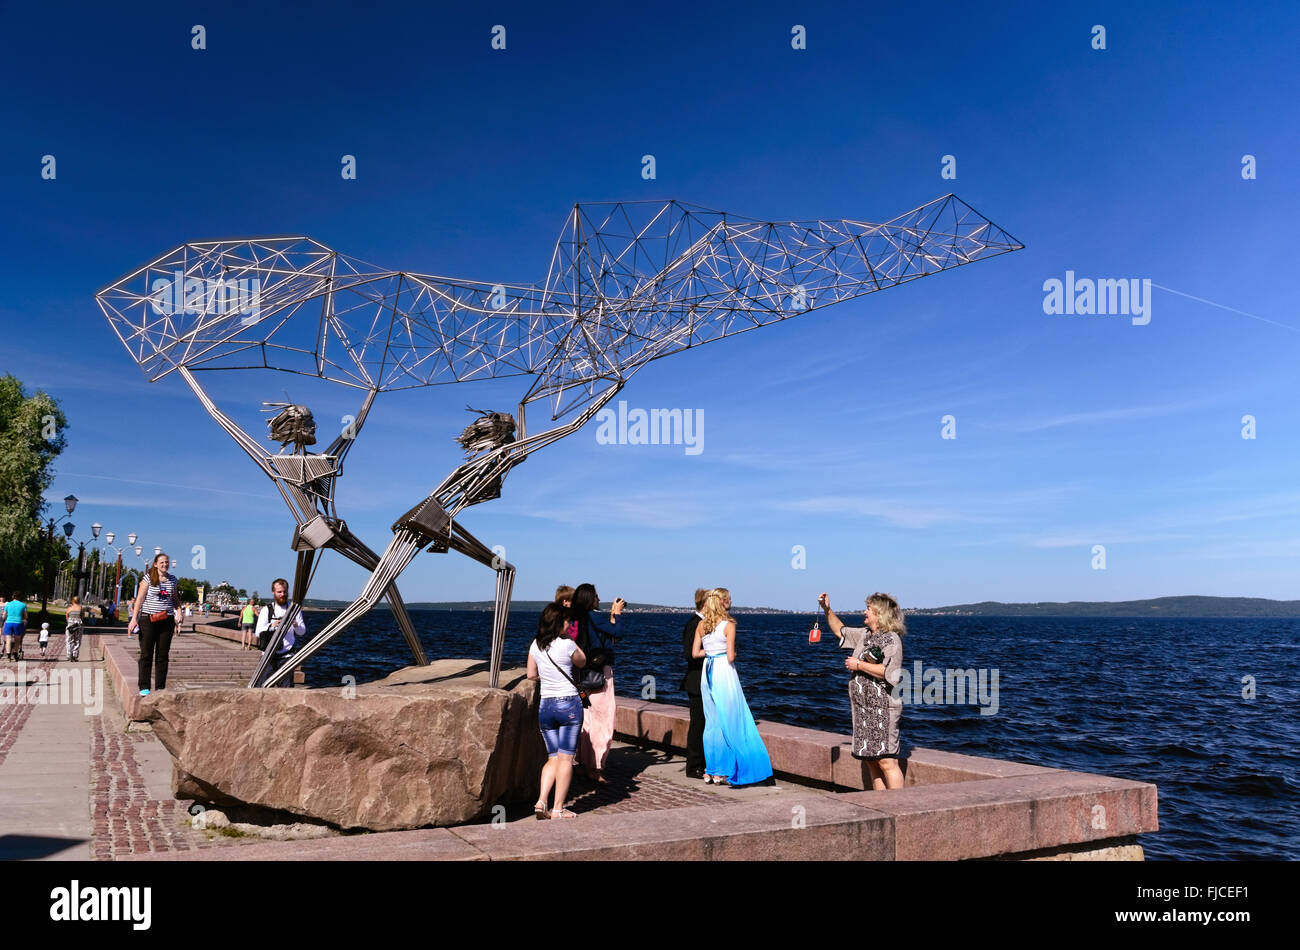 Sculpture “Fishers Casting a Net” in Petrozavodsk (Karelia, Russia) Stock Photo